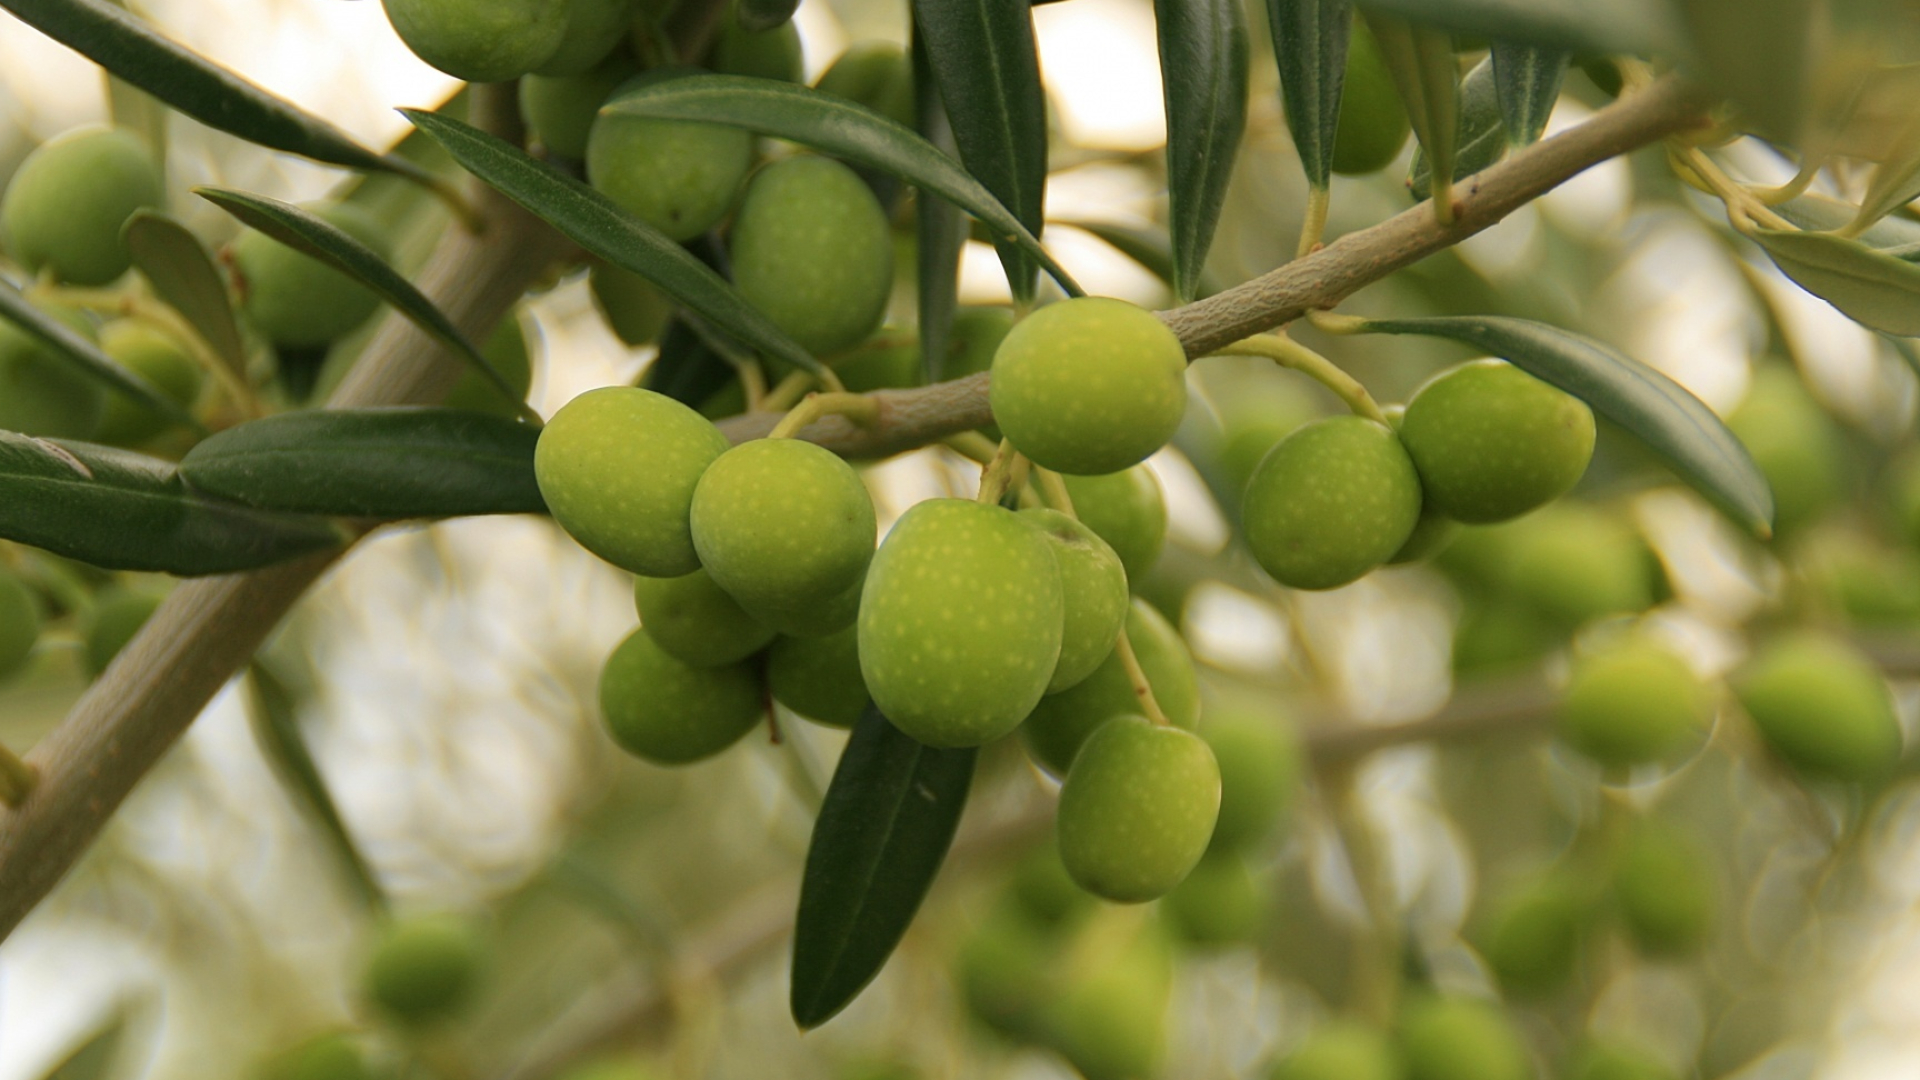 Olive: Commonly used in cooking, especially in Mediterranean cuisine. 1920x1080 Full HD Wallpaper.